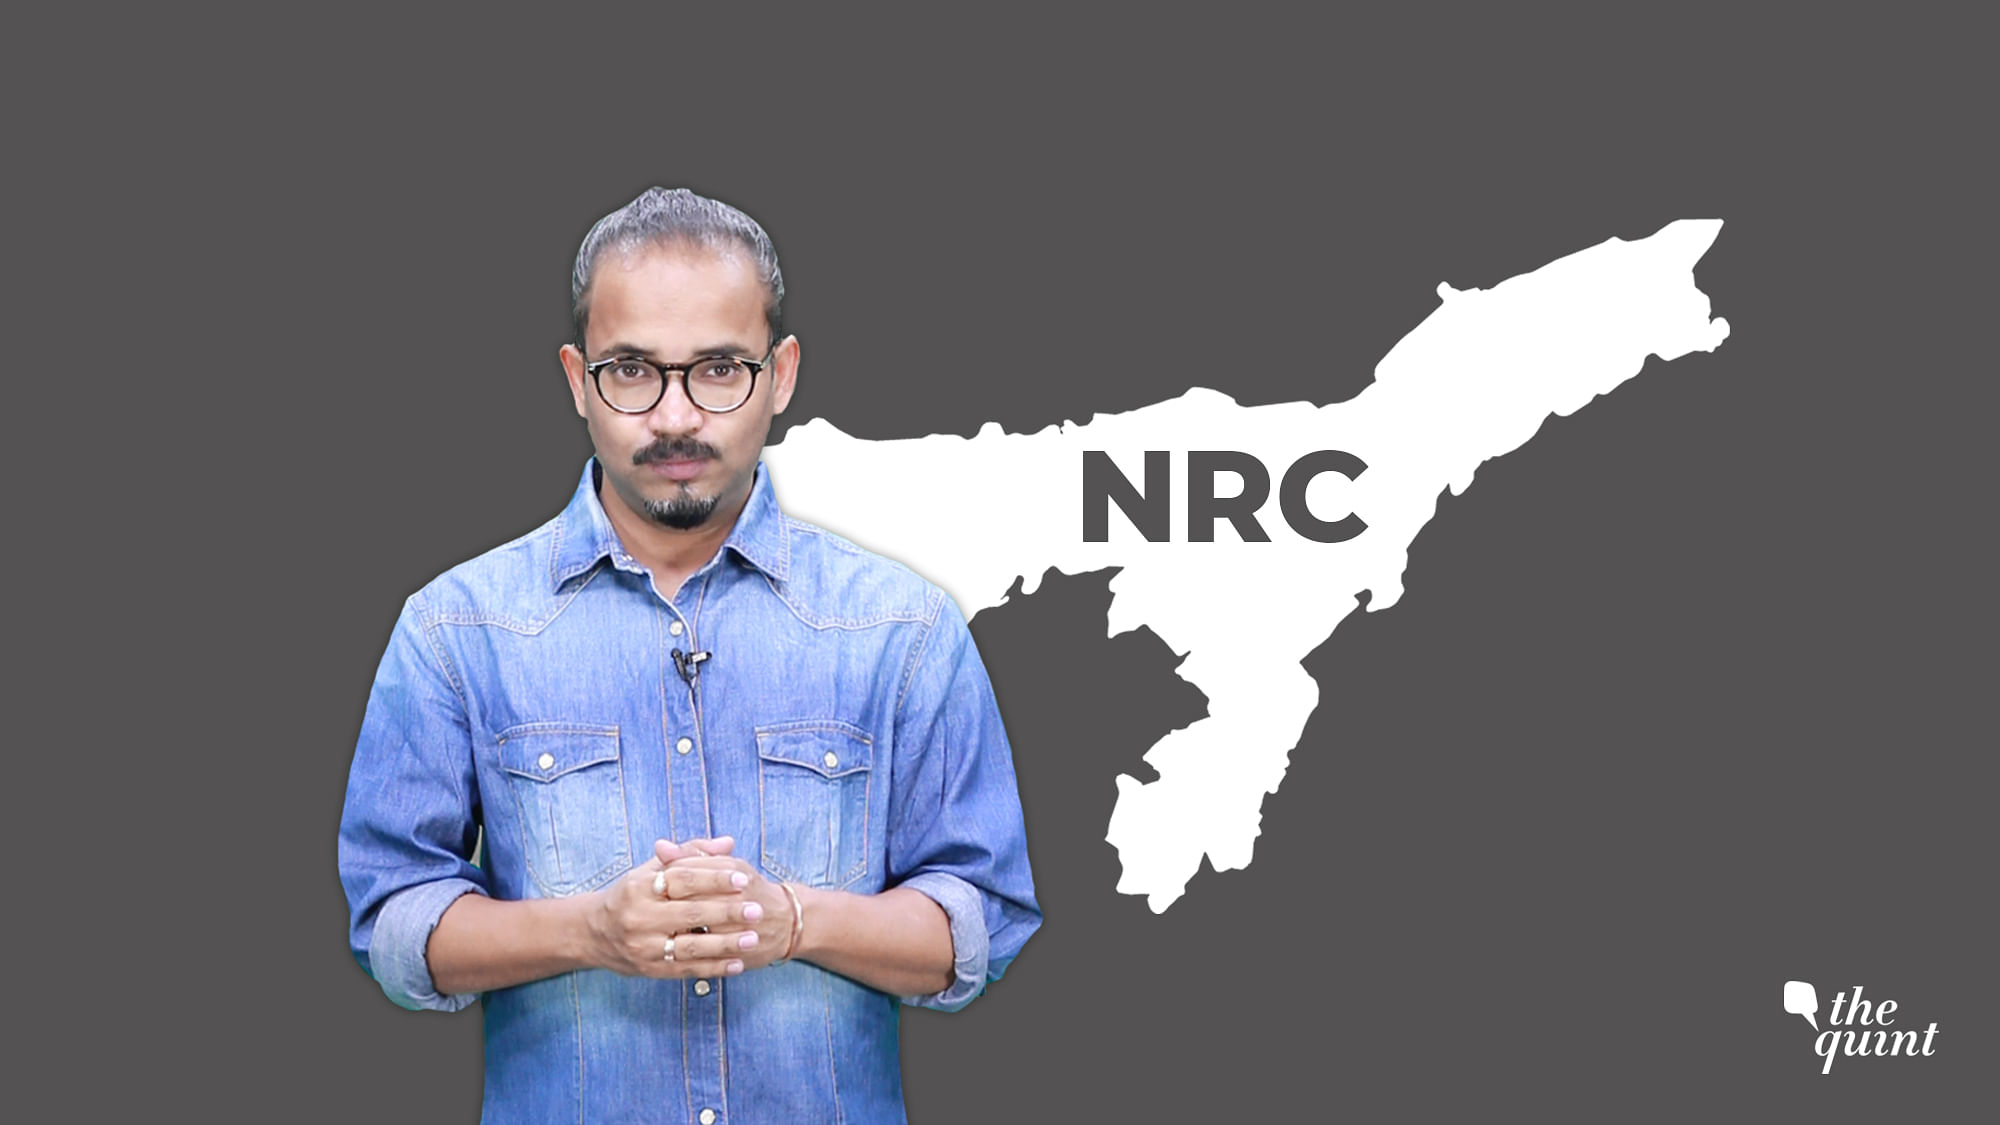 The NRC in Assam is aimed at identifying illegal migrants living in the state.&nbsp;